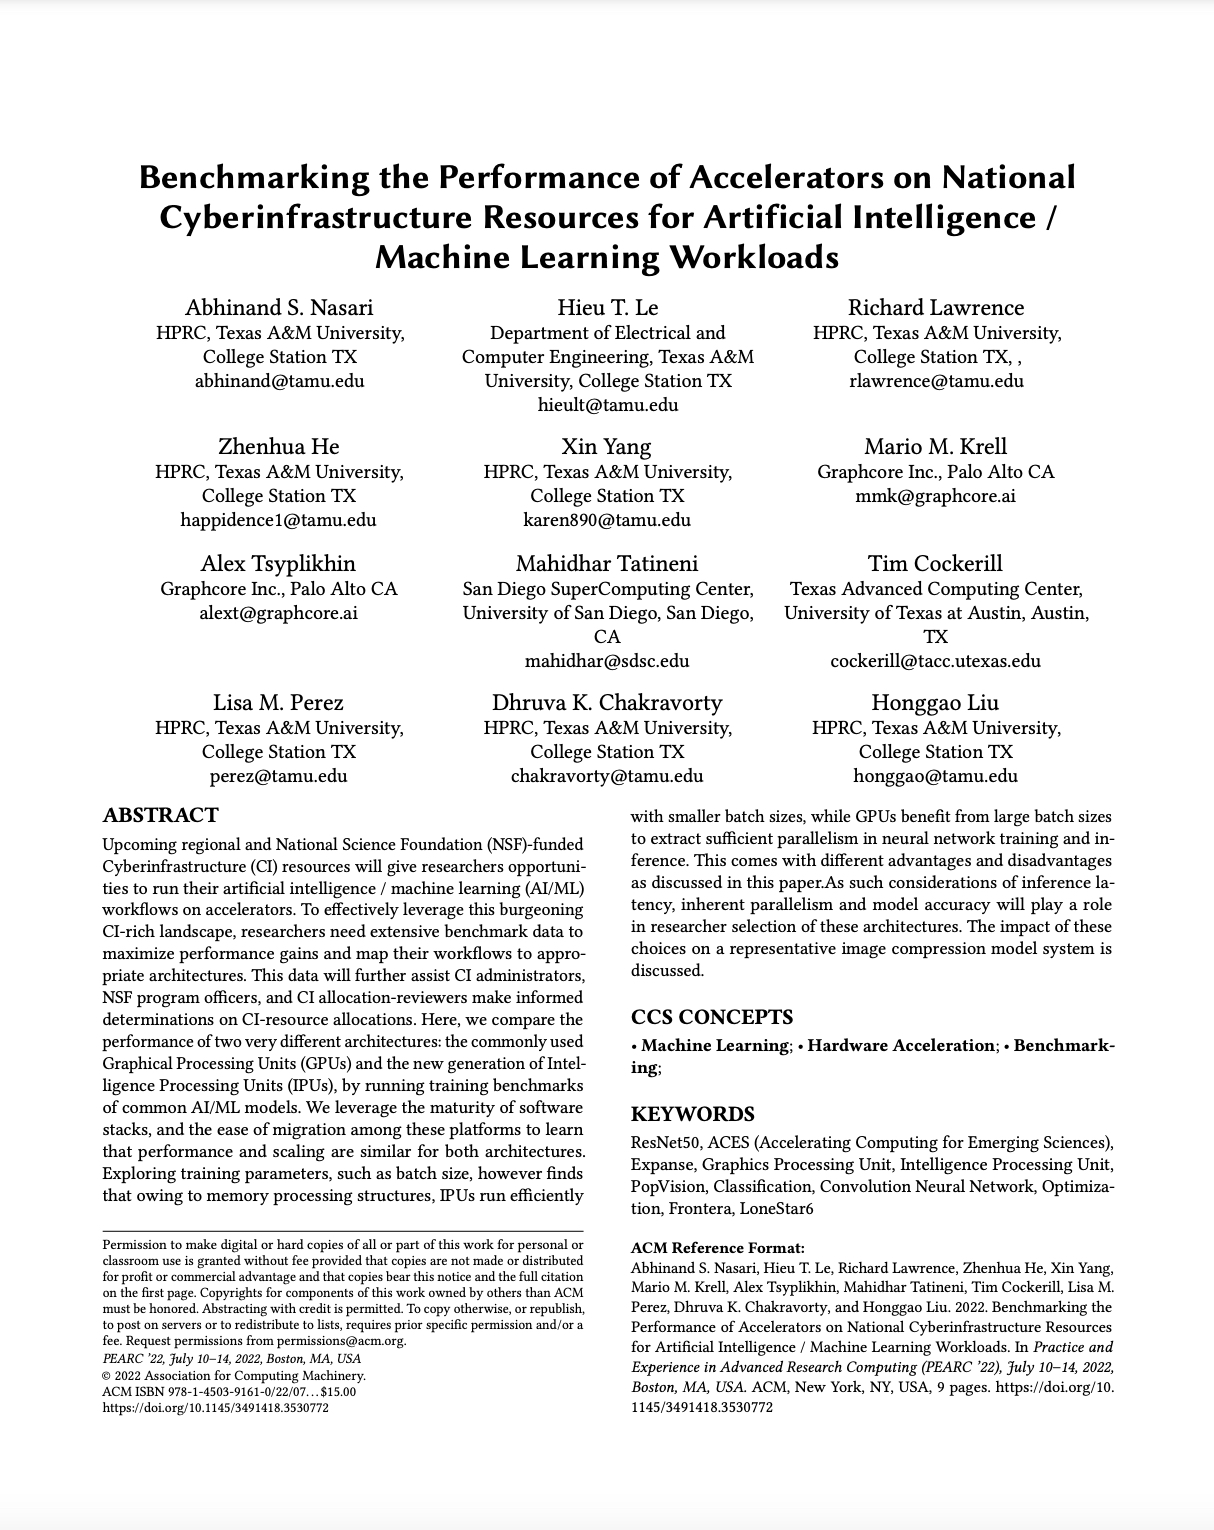 Texas A&M University & Graphcore: Benchmarking the Performance of Accelerators on National Cyberinfrastructure Resources for Artificial Intelligence / Machine Learning Workloads